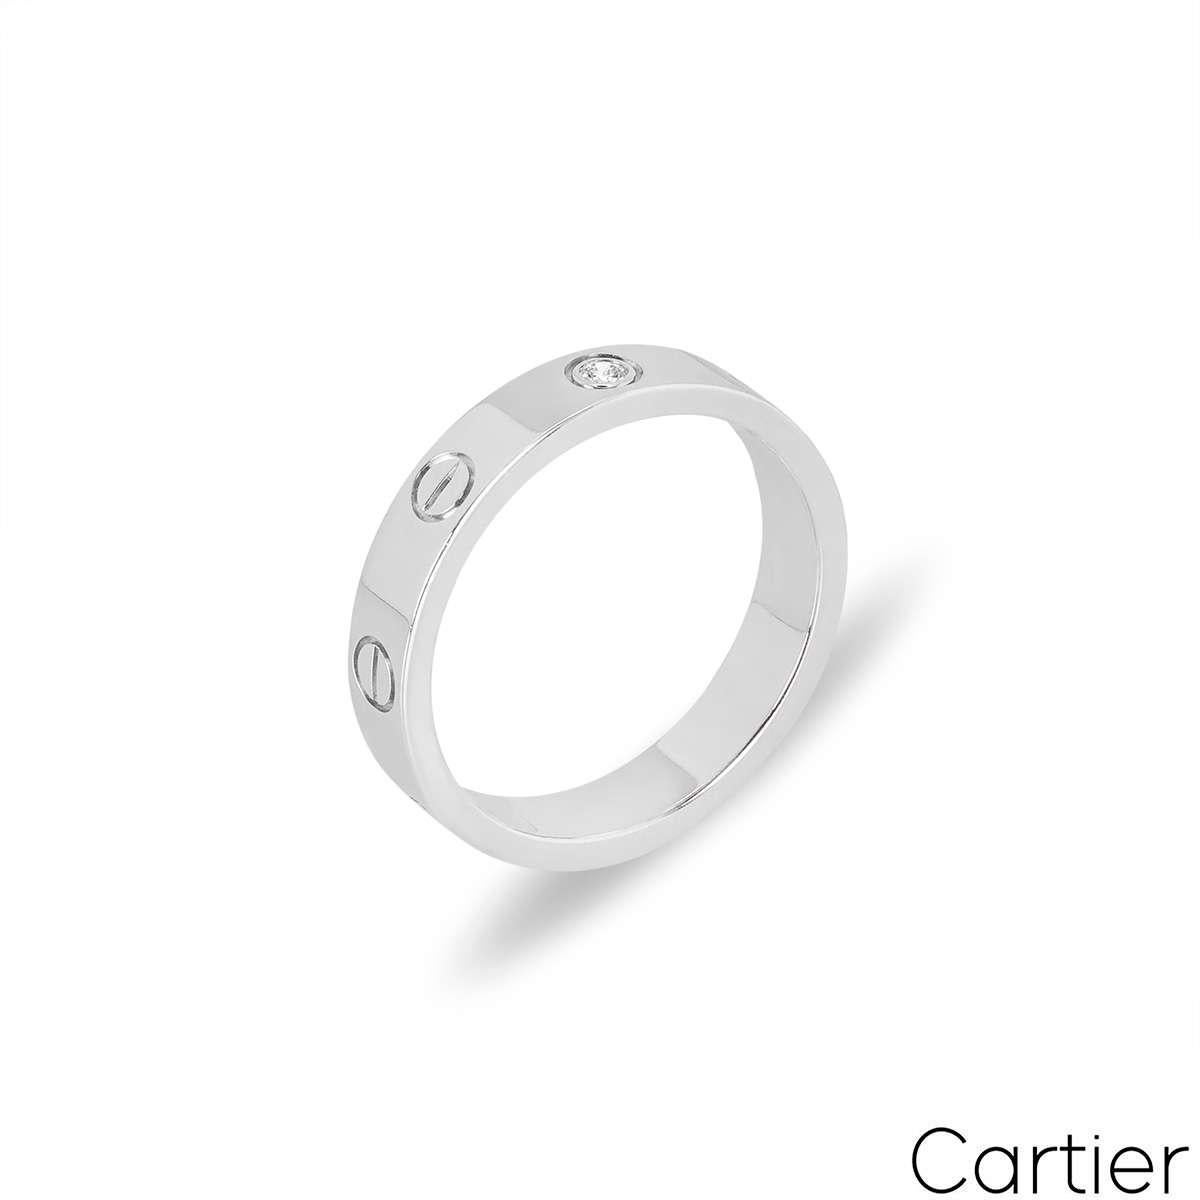 A Cartier diamond wedding band in white gold from the Love collection. The ring comprises of the iconic Cartier screws and a single round brilliant cut diamond set in the centre, totalling 0.02ct. Measuring 4mm in width, this ring is a size UK N -